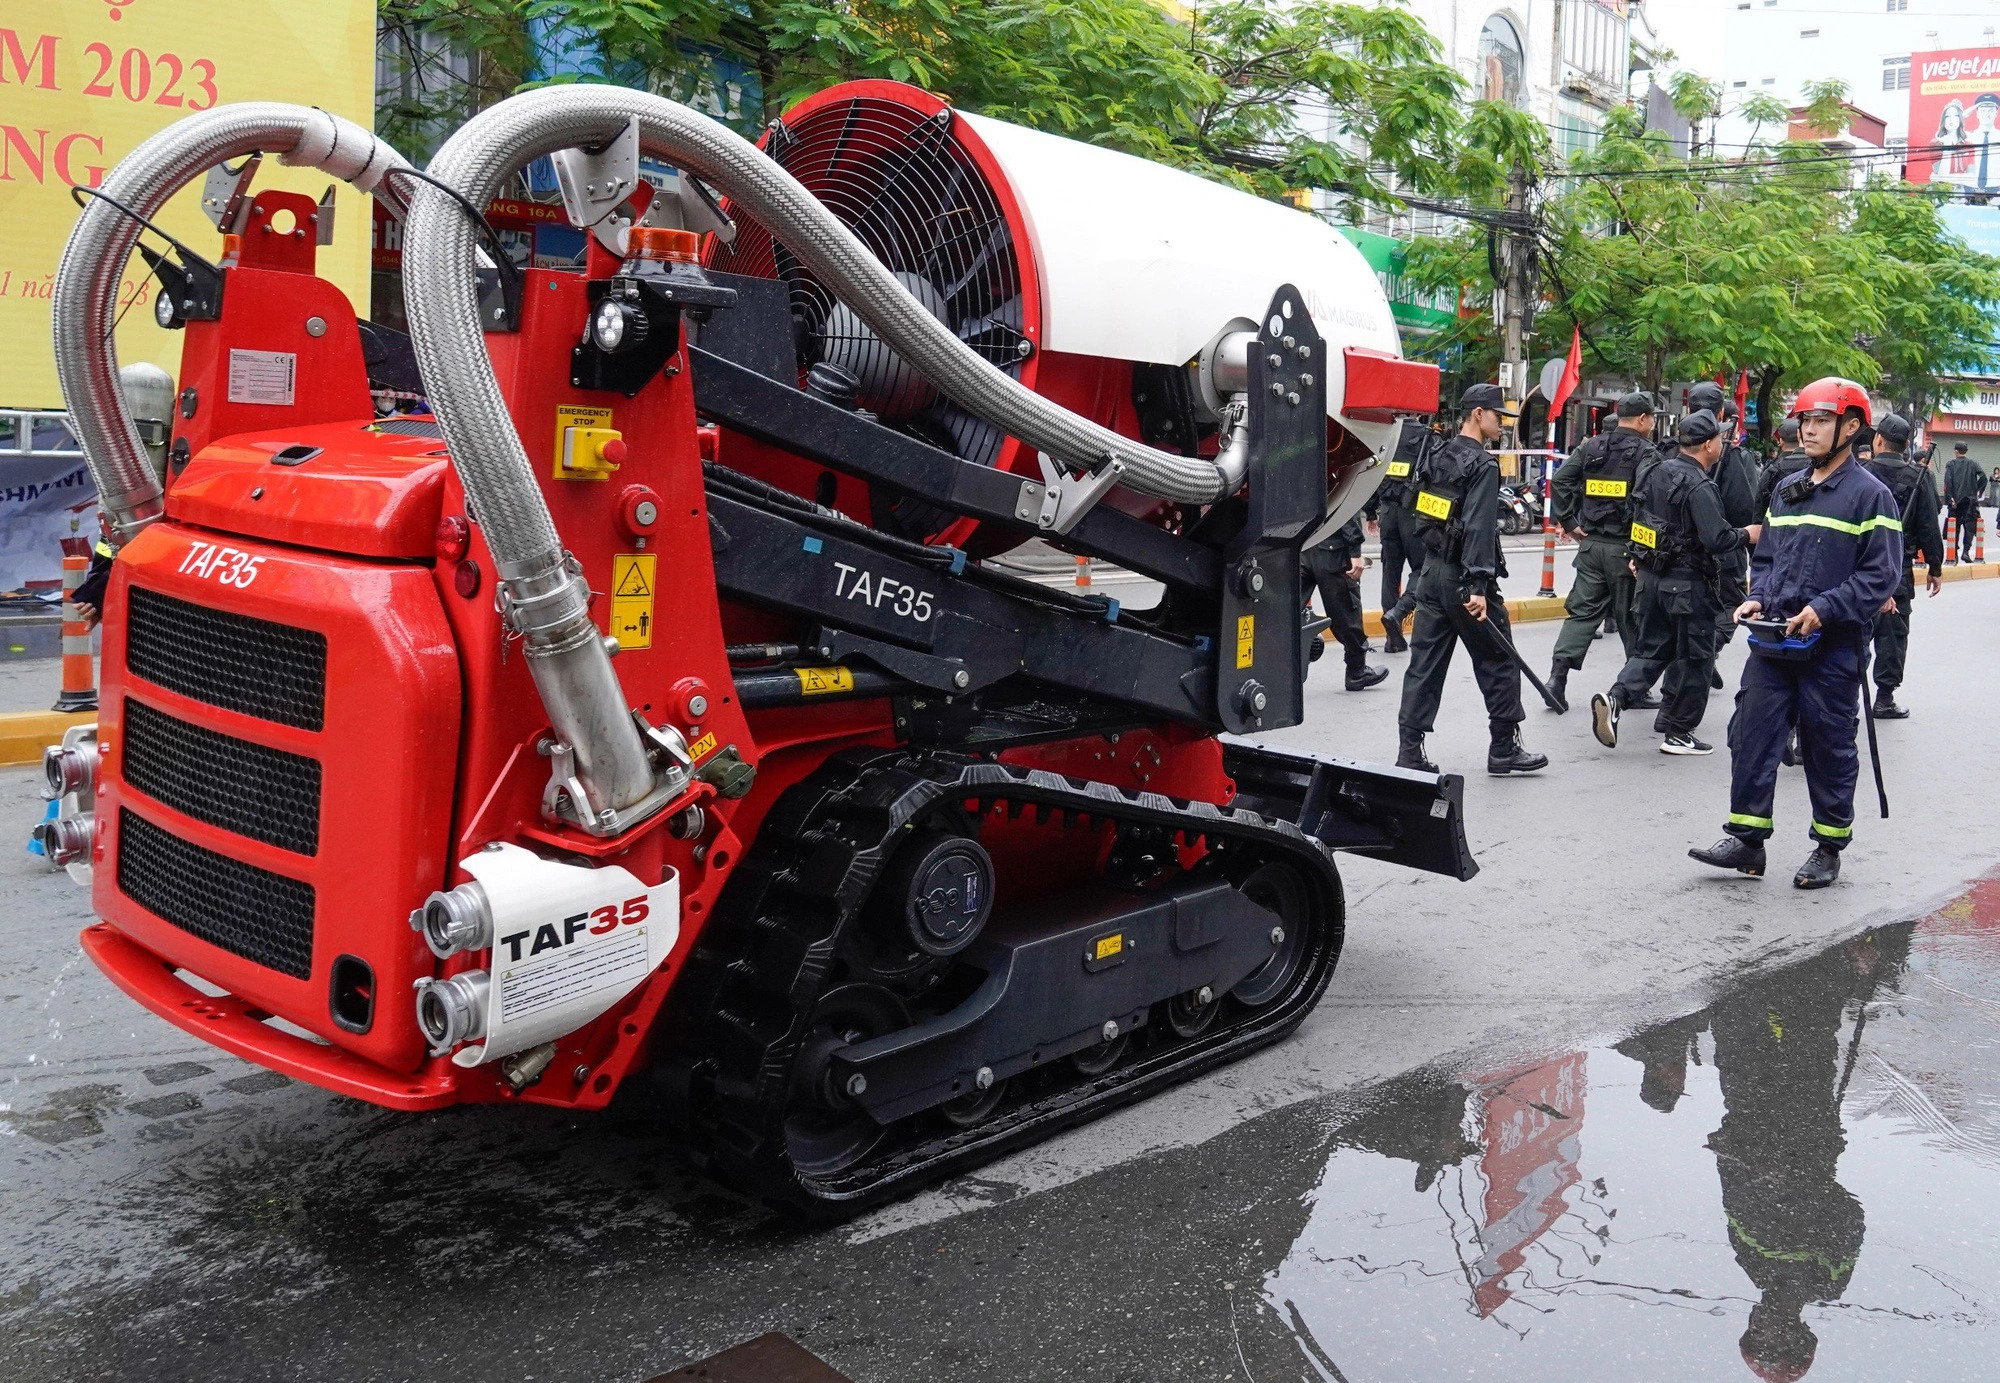 Firefighting robot takes part in fire drill in Vietnam’s Hai Phong